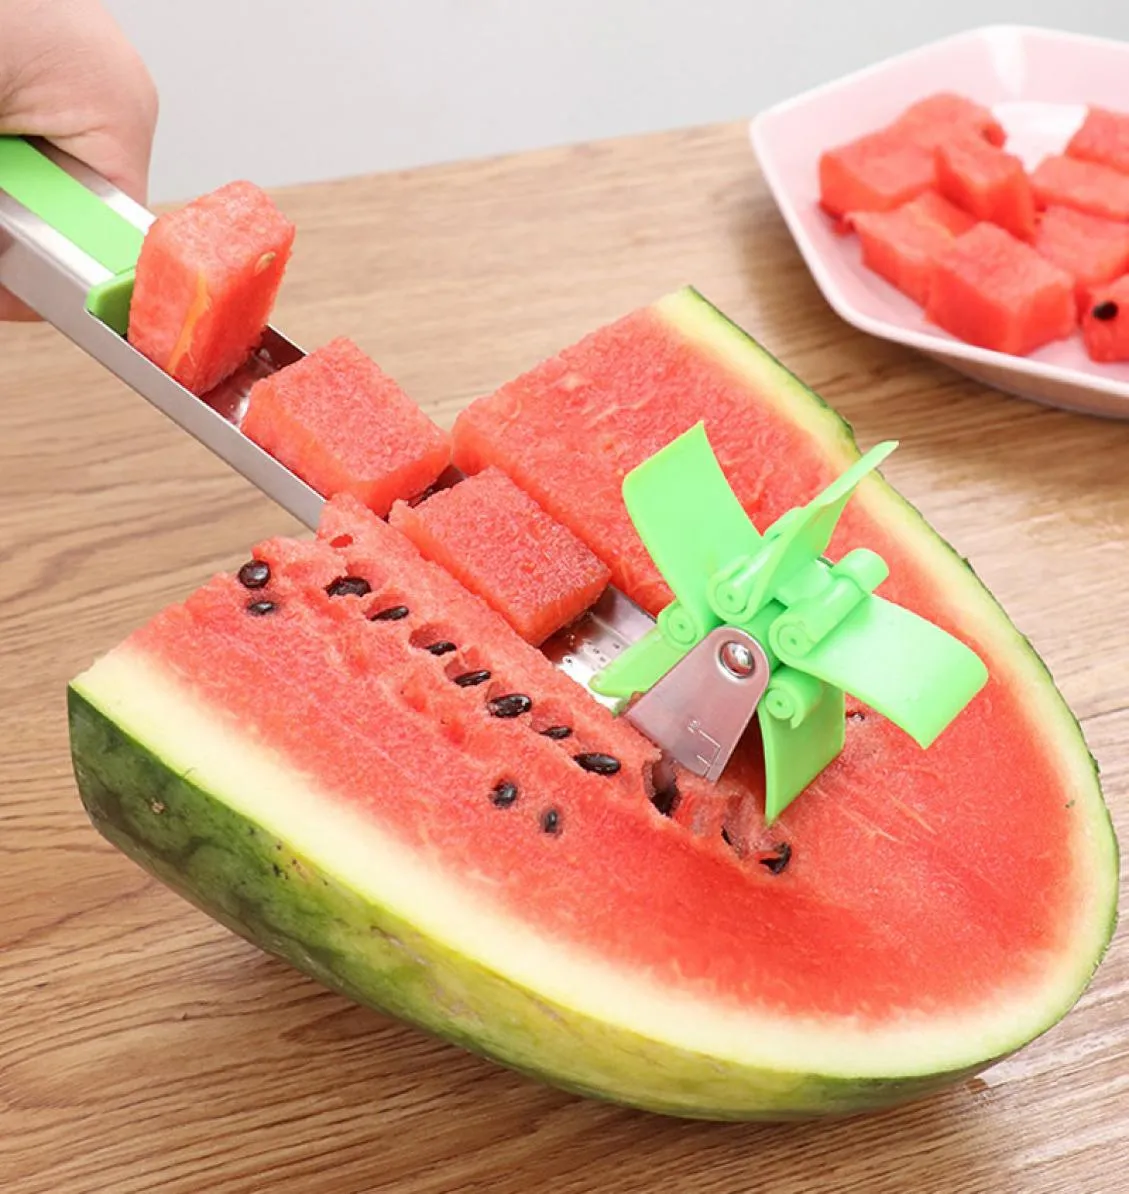 Windmill Watermelon Cutting Stainless Steel Knife Corer Tongs Fruit Vegetable Tools Watermelon Slicer Cutter Kitchen Gadgets3325261